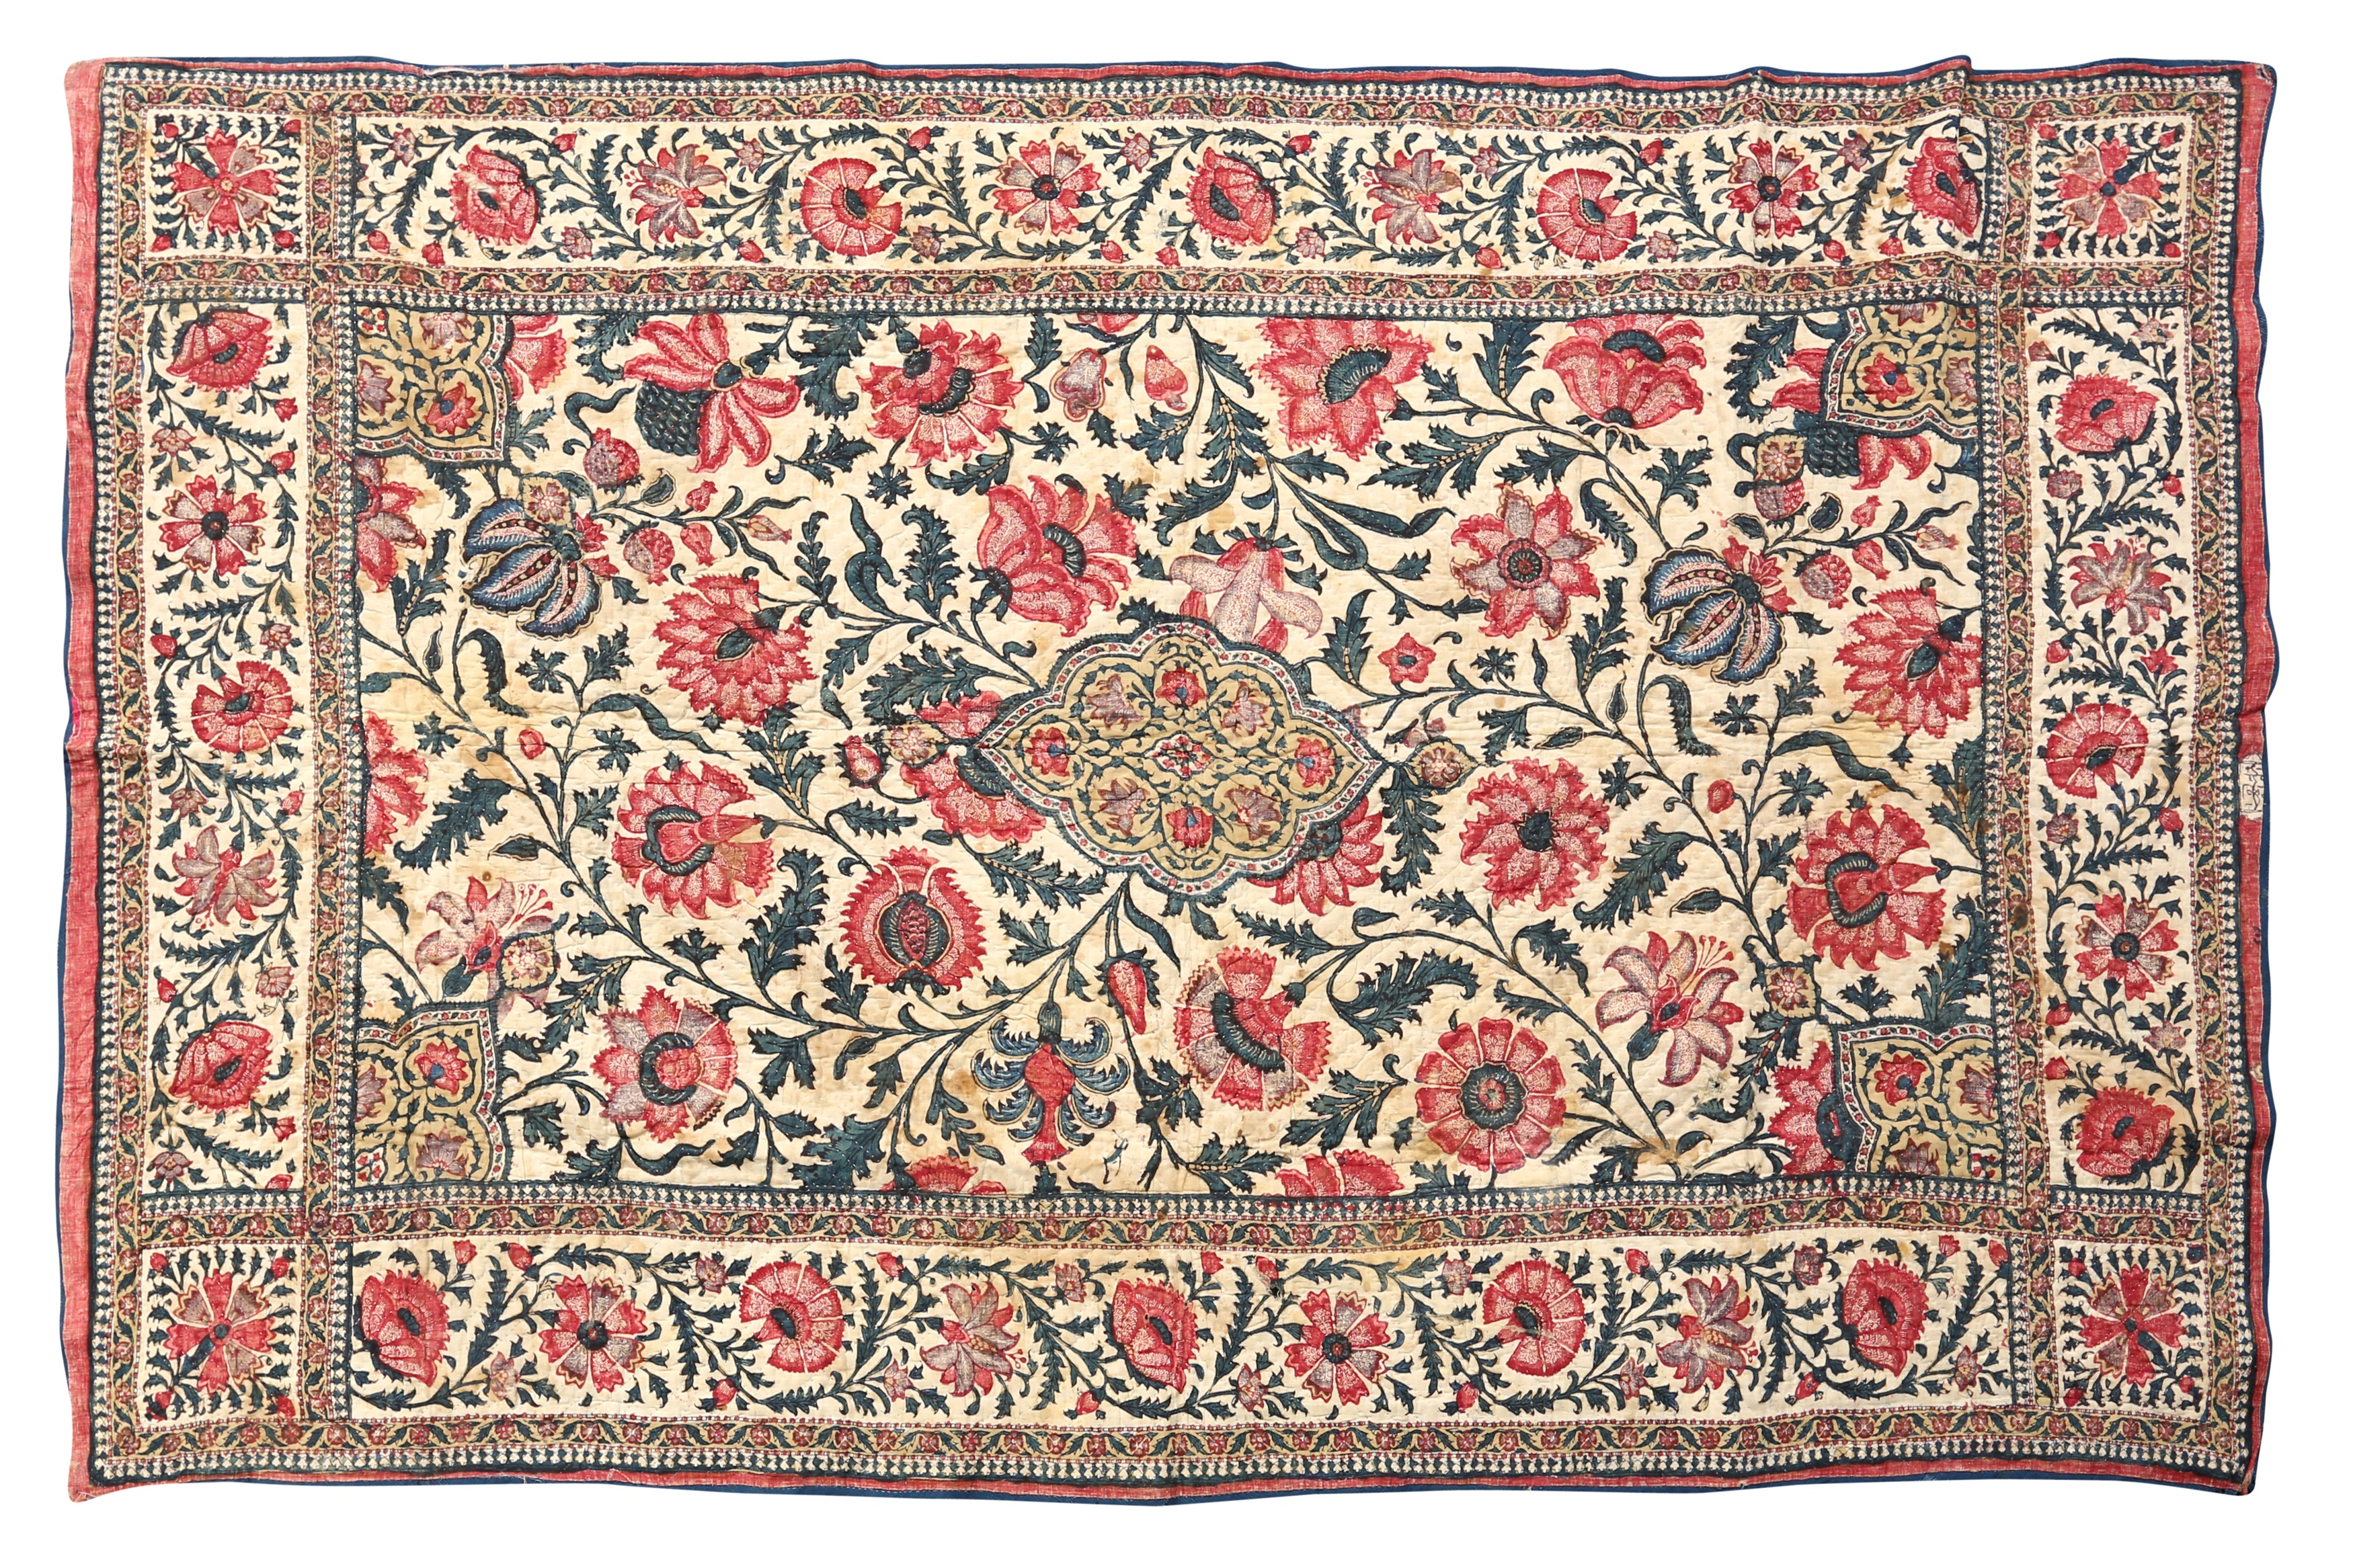 AN INDO-PERSIAN KALAMKARI CHILD’S QUILTED COT COVER